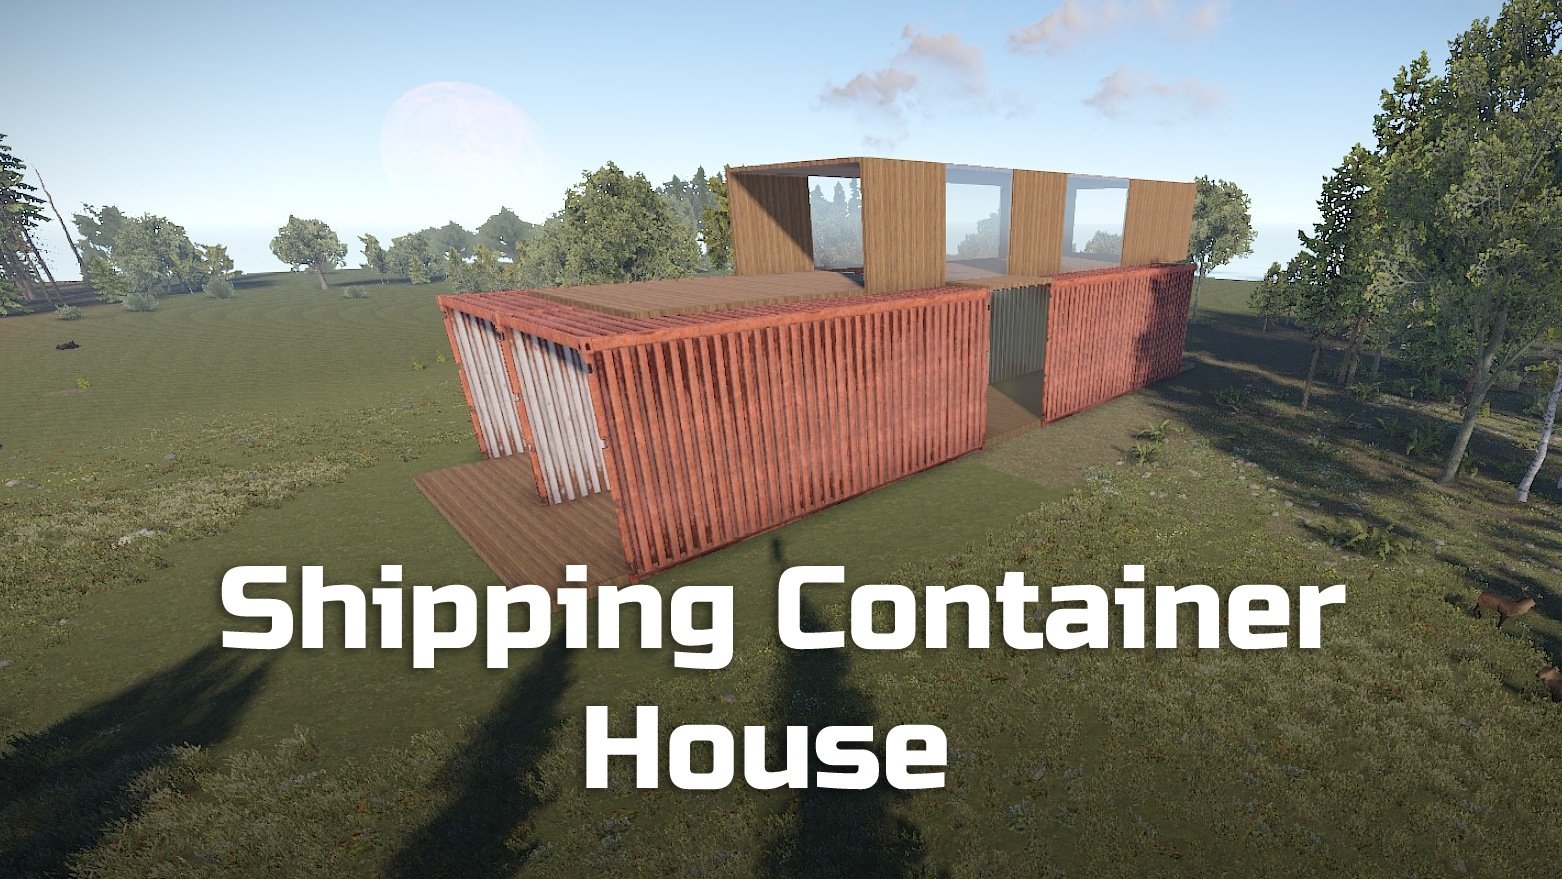 Shipping Container House | Place For Building